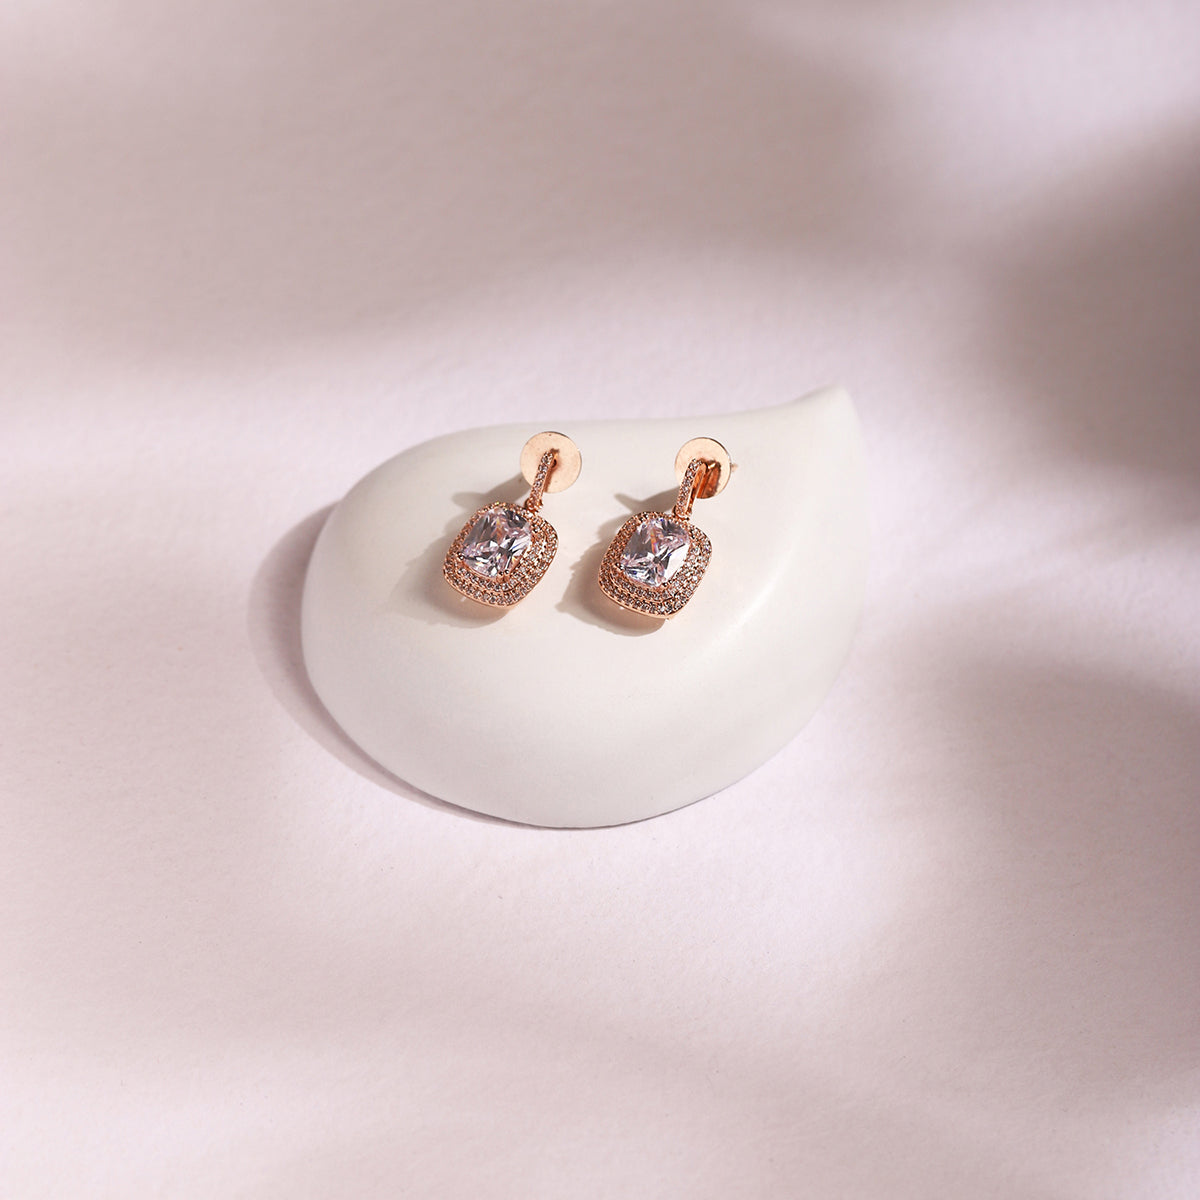 Gold & White Contemporary Studs Earrings